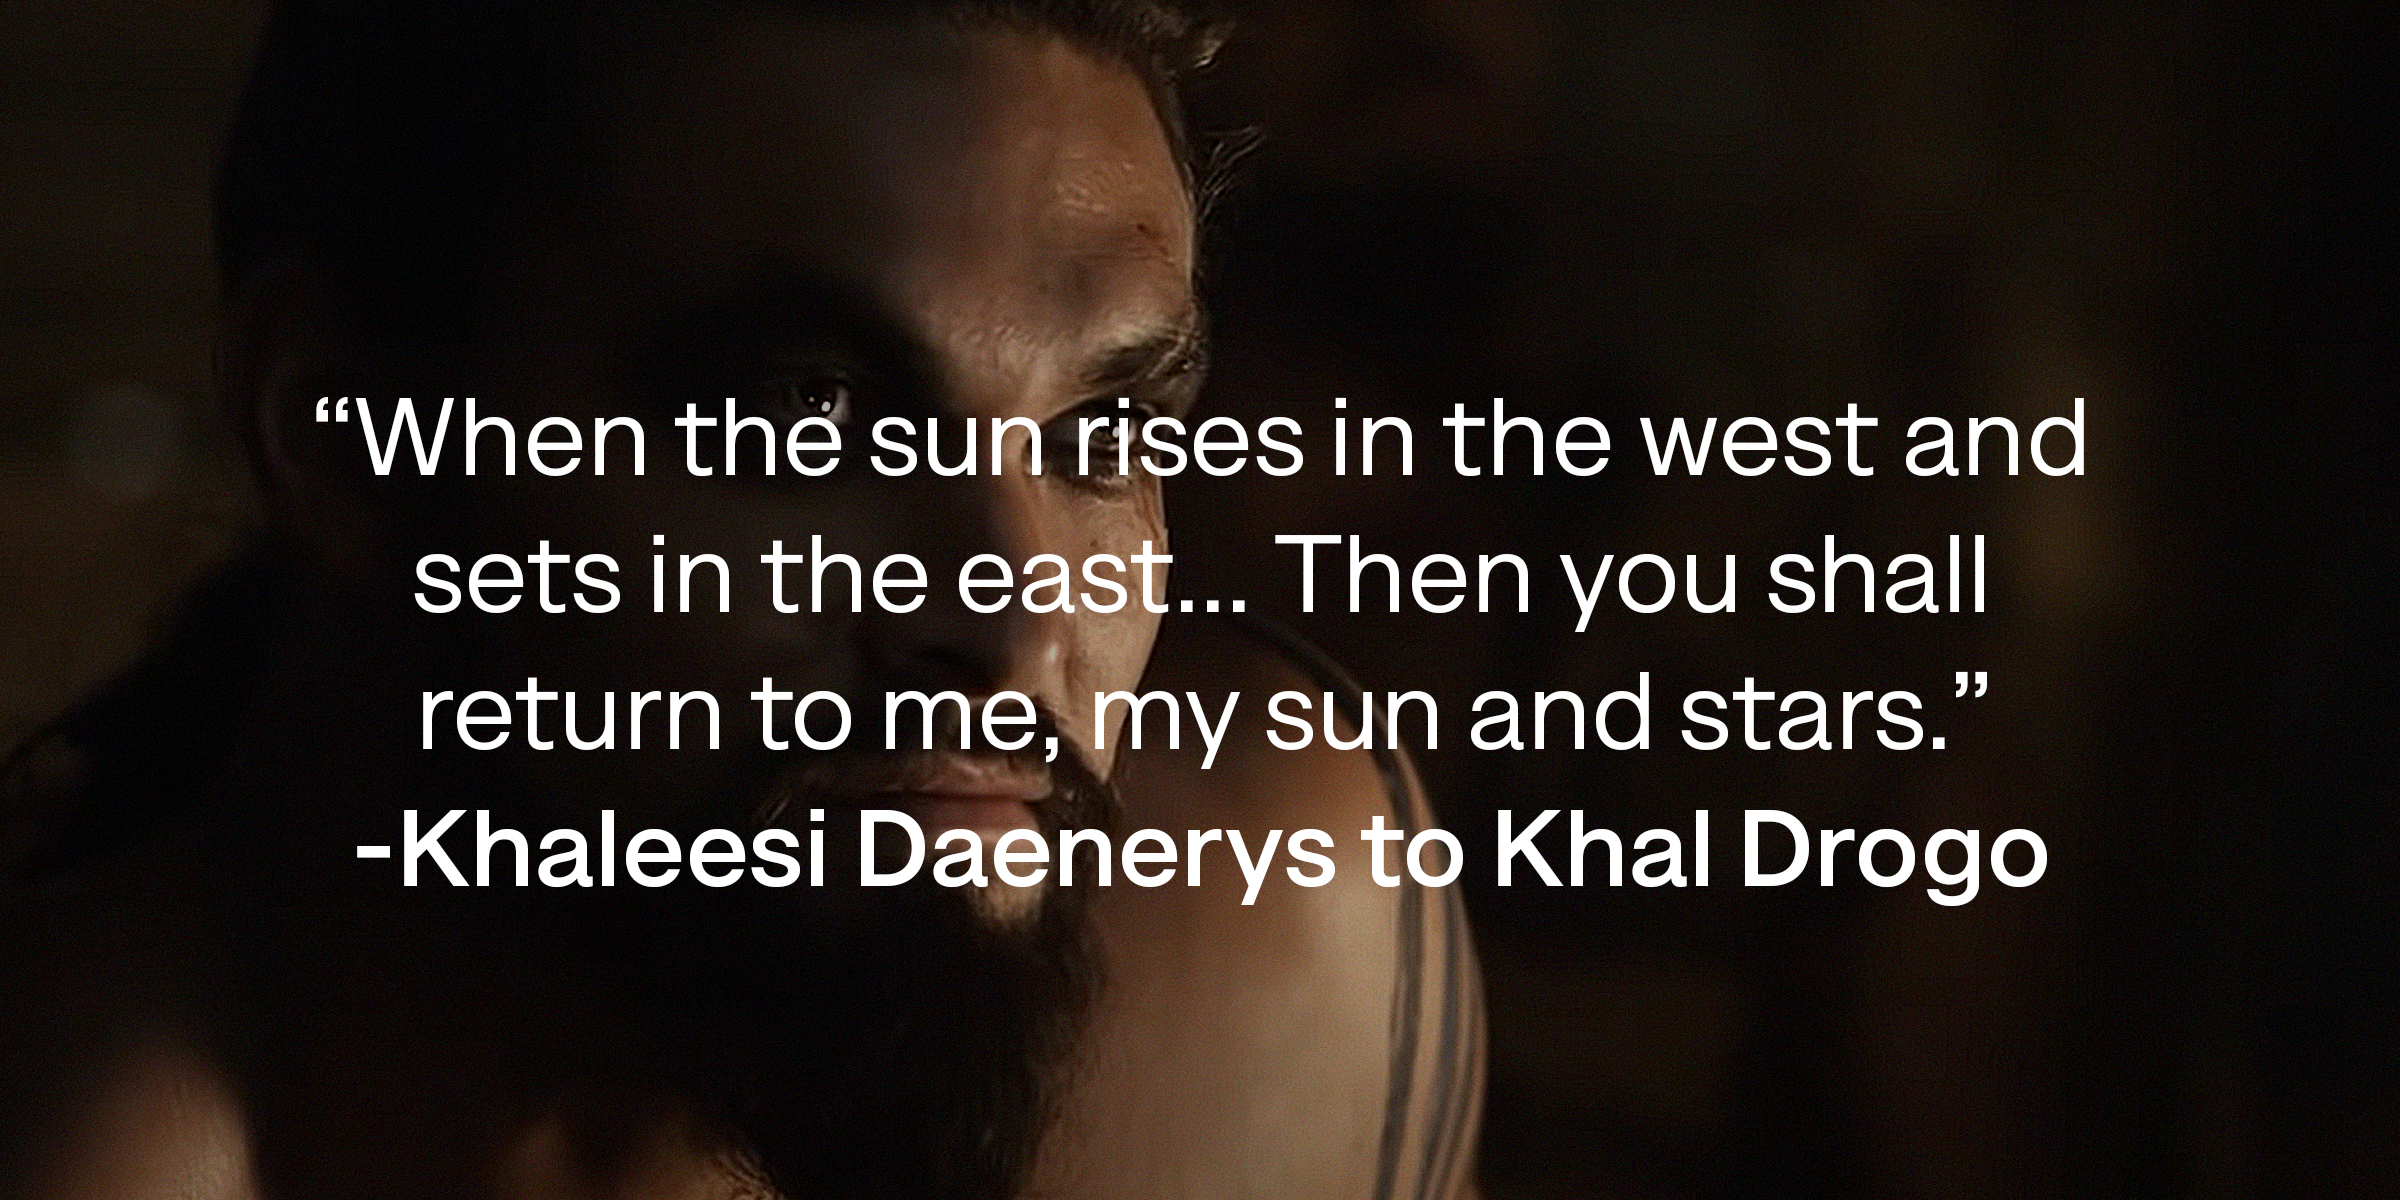 A photo of Khal Drogo with Khaleesi Daenerys's quote: "When the sun rises in the west and sets in the east... Then you shall return to me, my sun and stars." | Source: youtube.com/gameofthrones